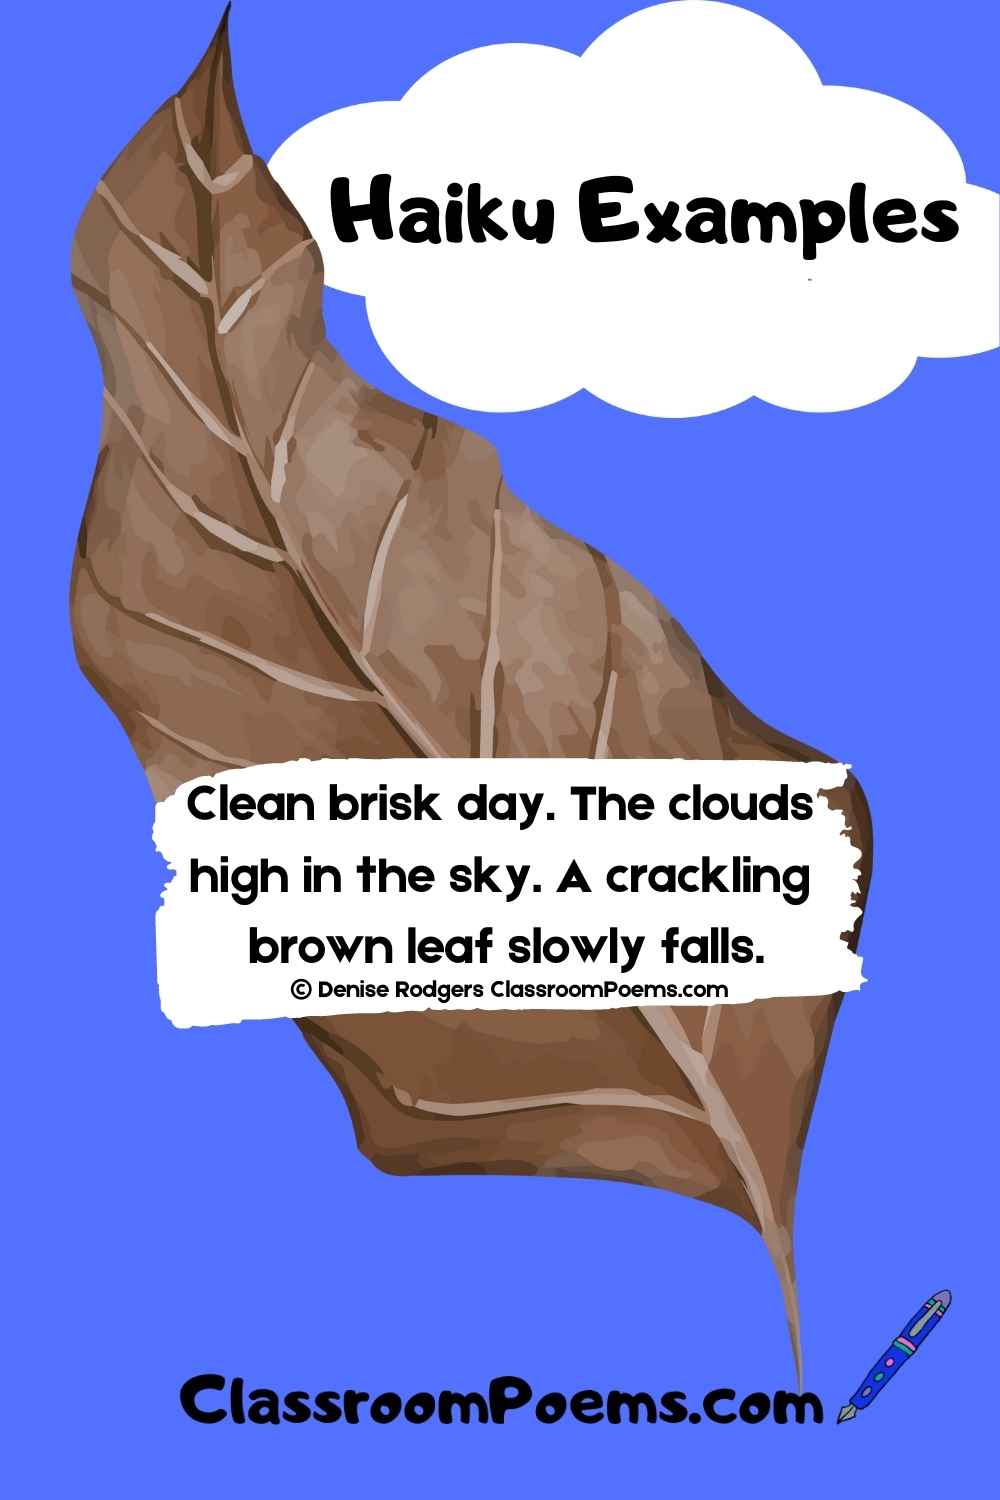 Haiku examples by Denise Rodgers on ClassroomPoems.com.